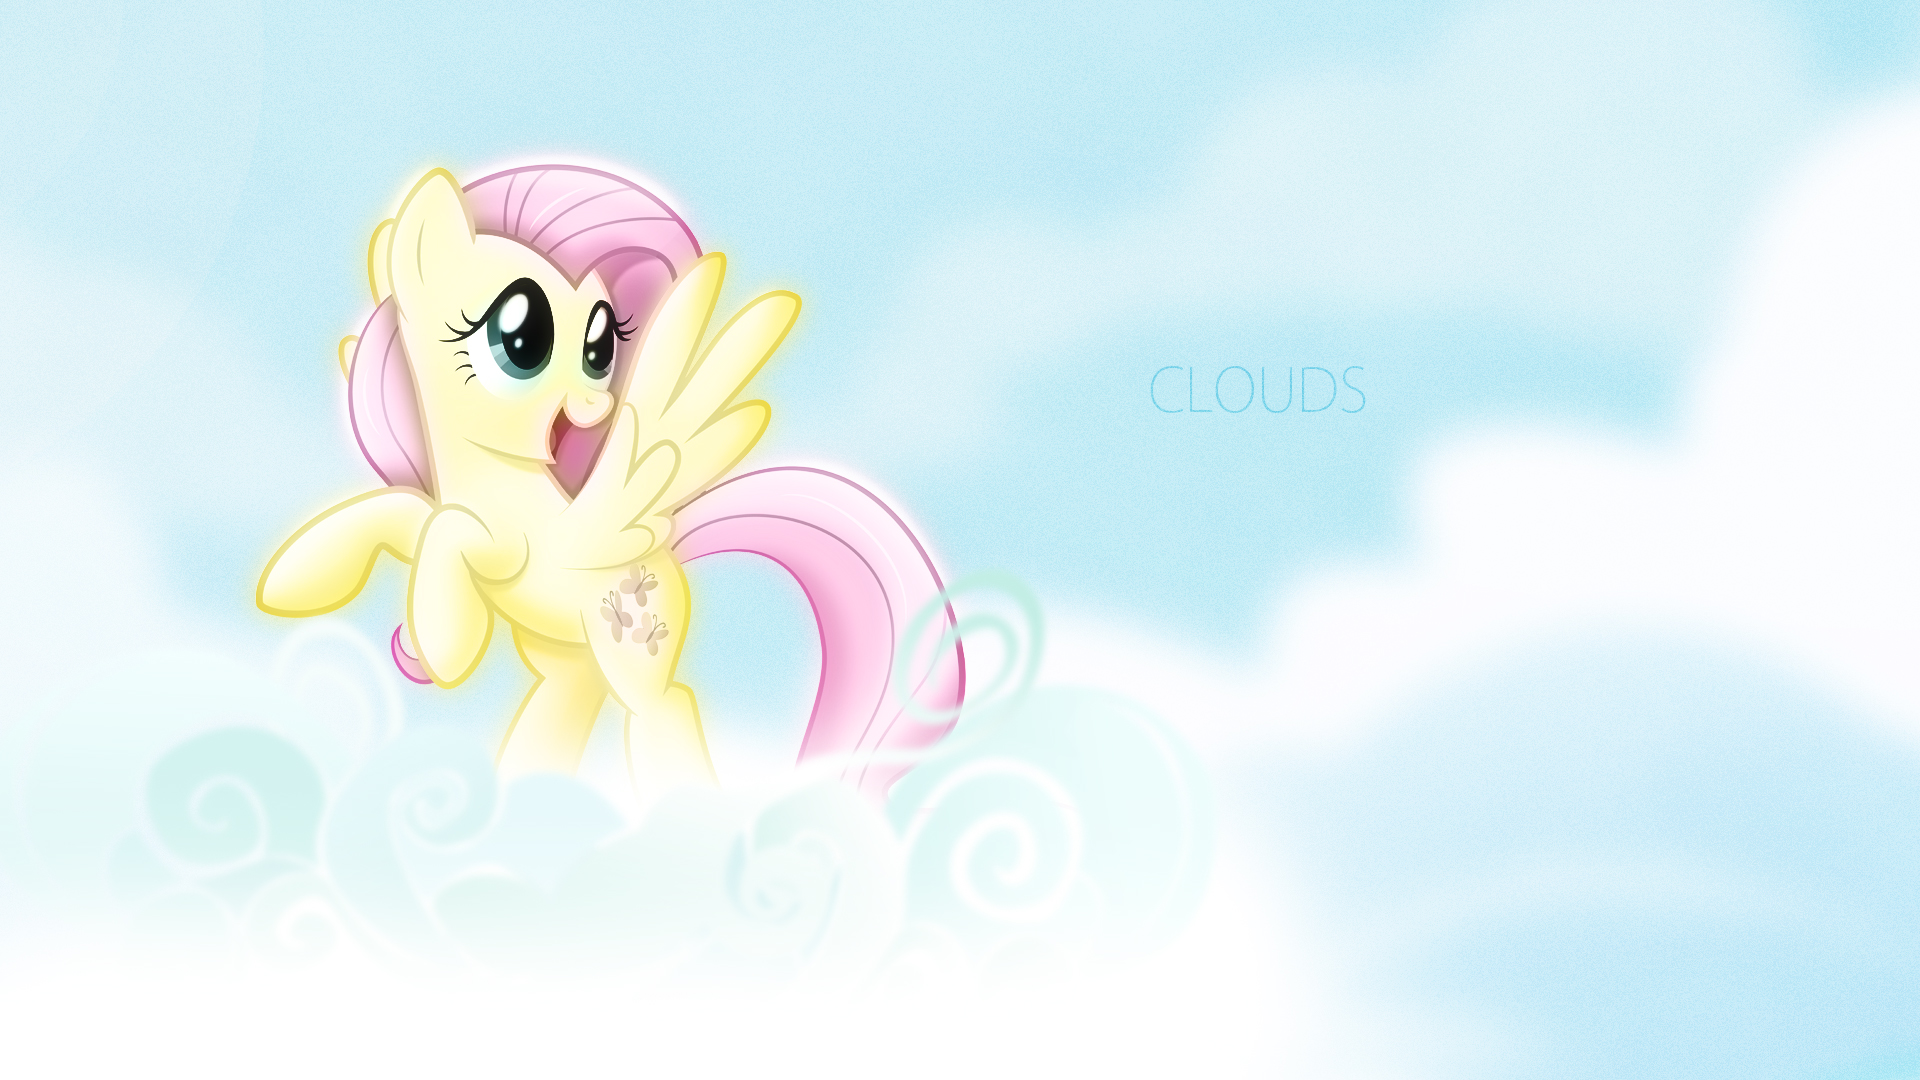 Clouds by brandyfriend5432 and Karl97